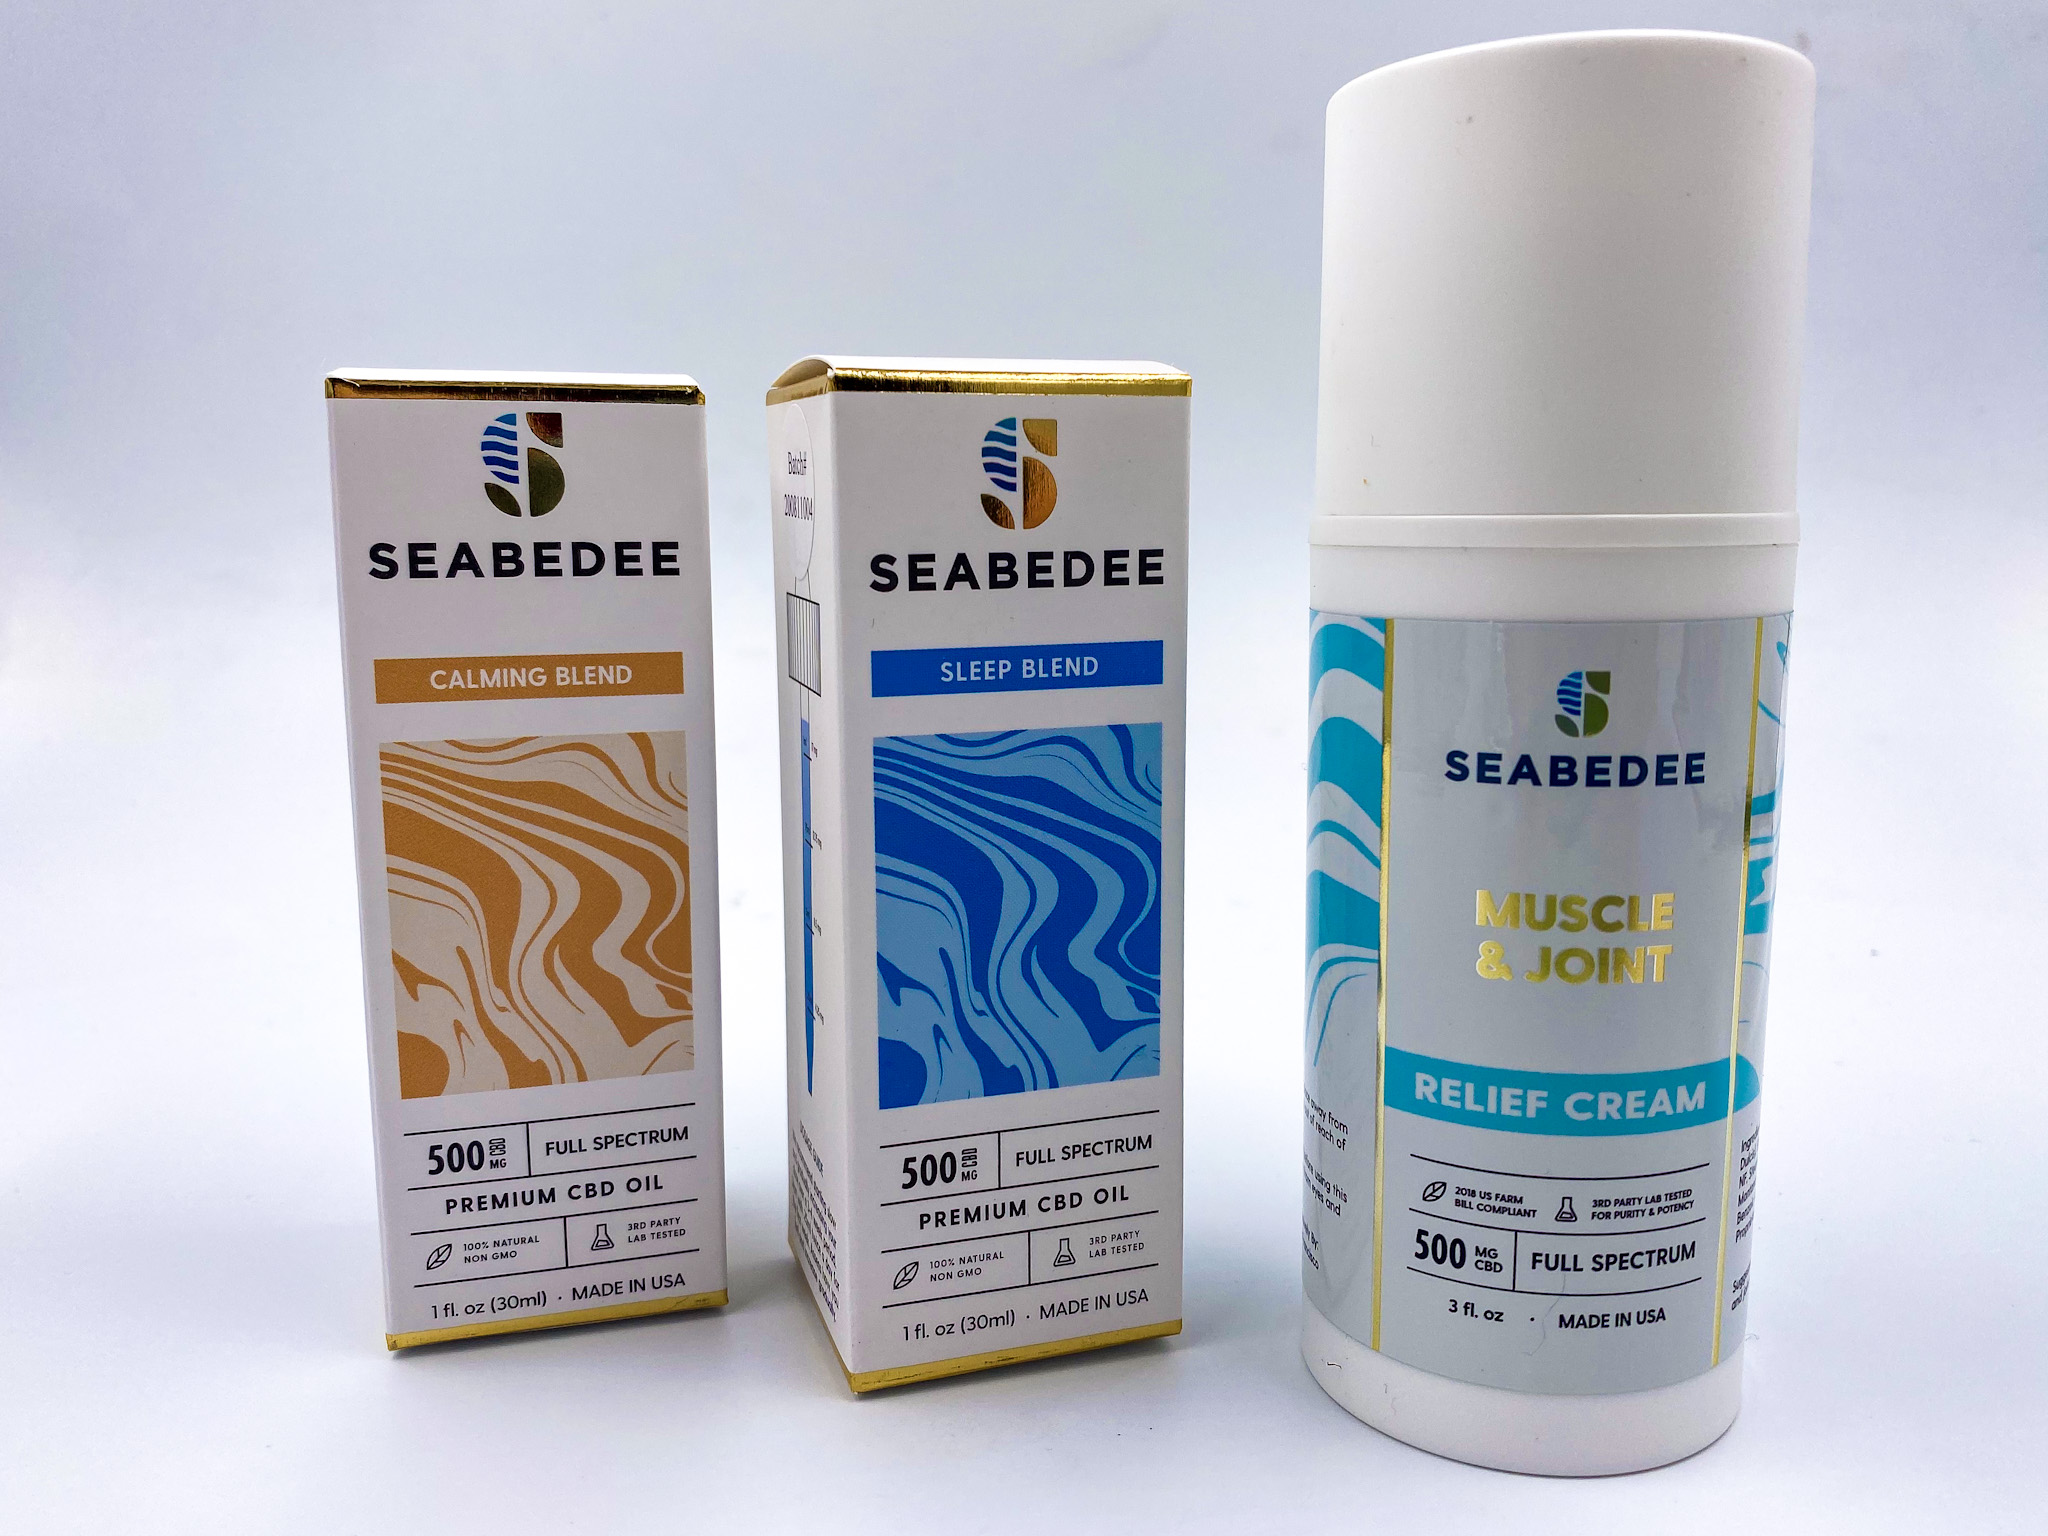 Seabedee products